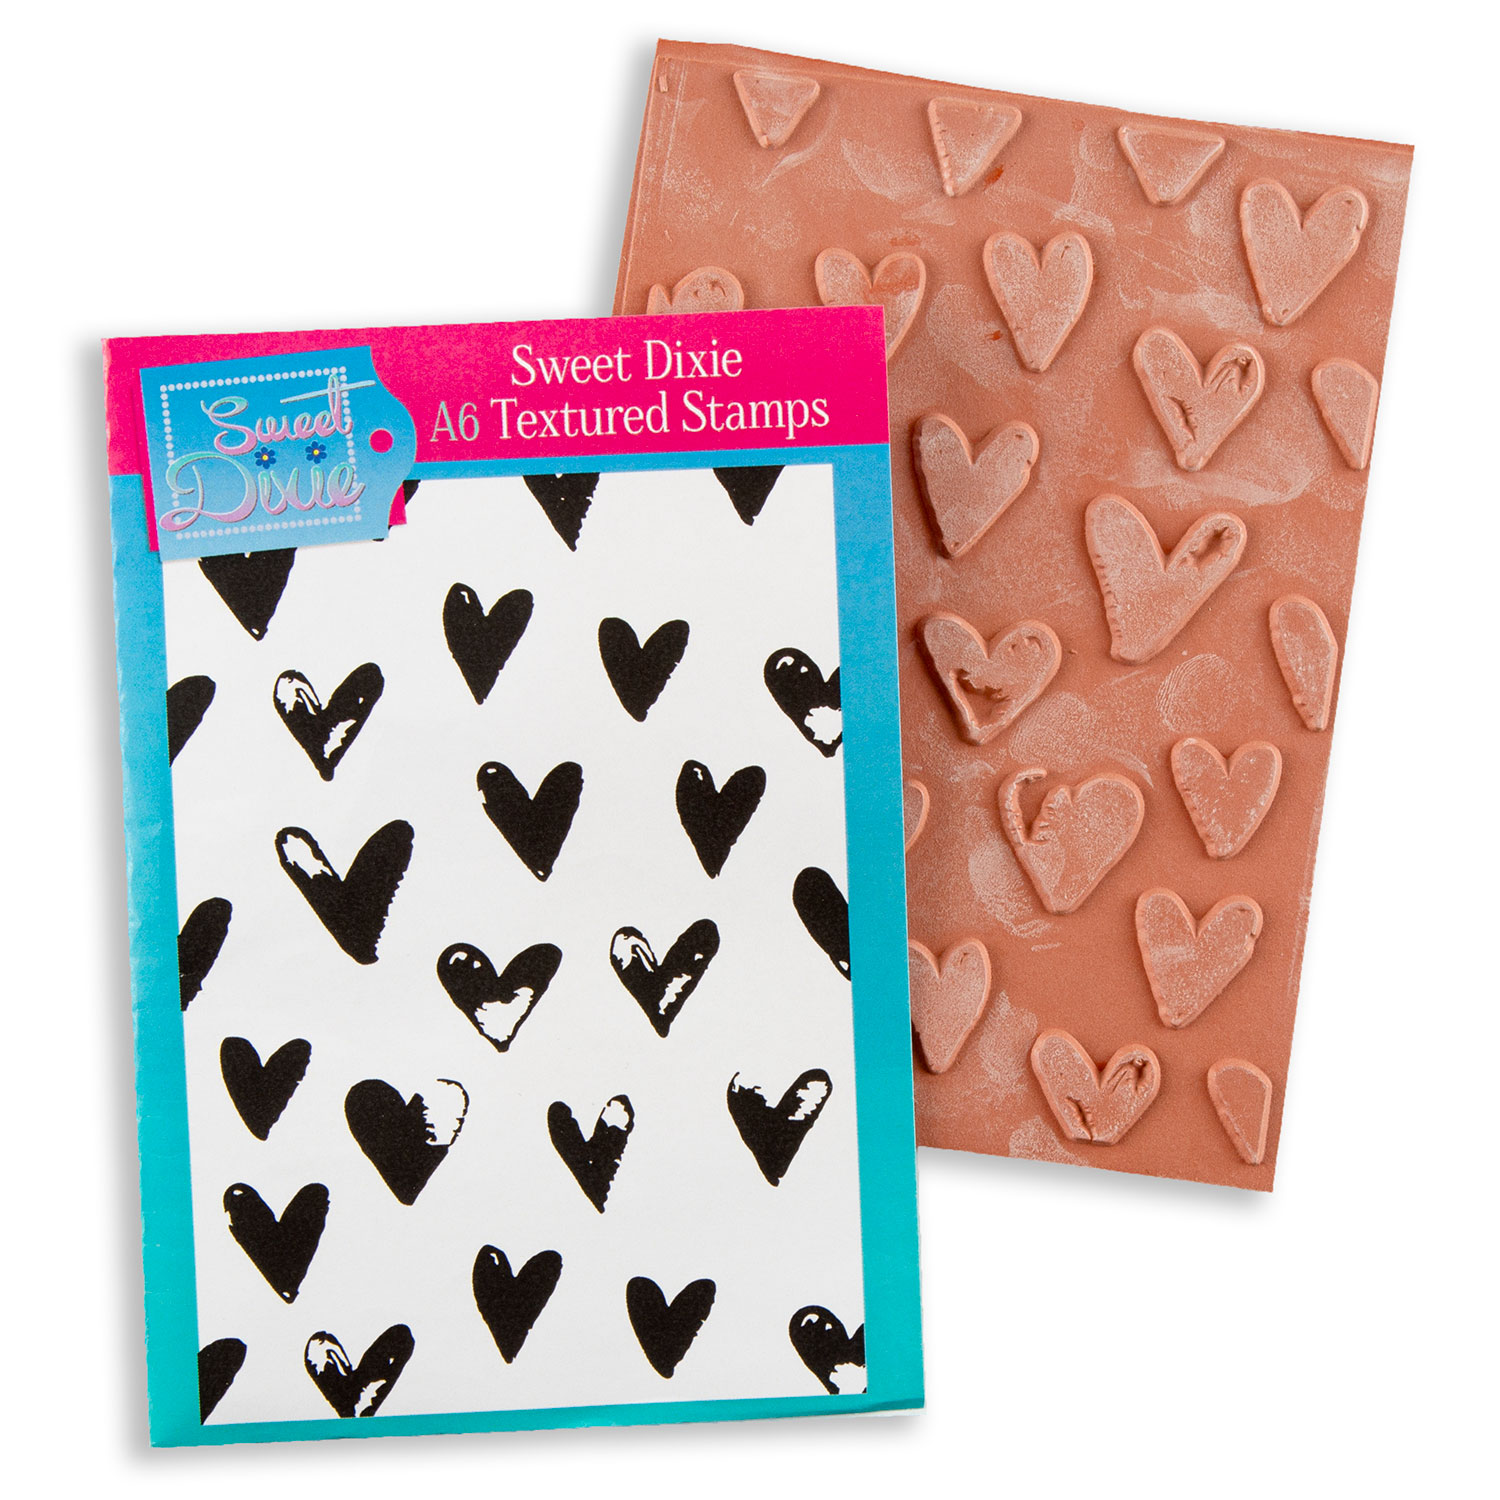 Sweet Dixie Texture Stamps Pick-n-Mix Choose 2 - Texture #6